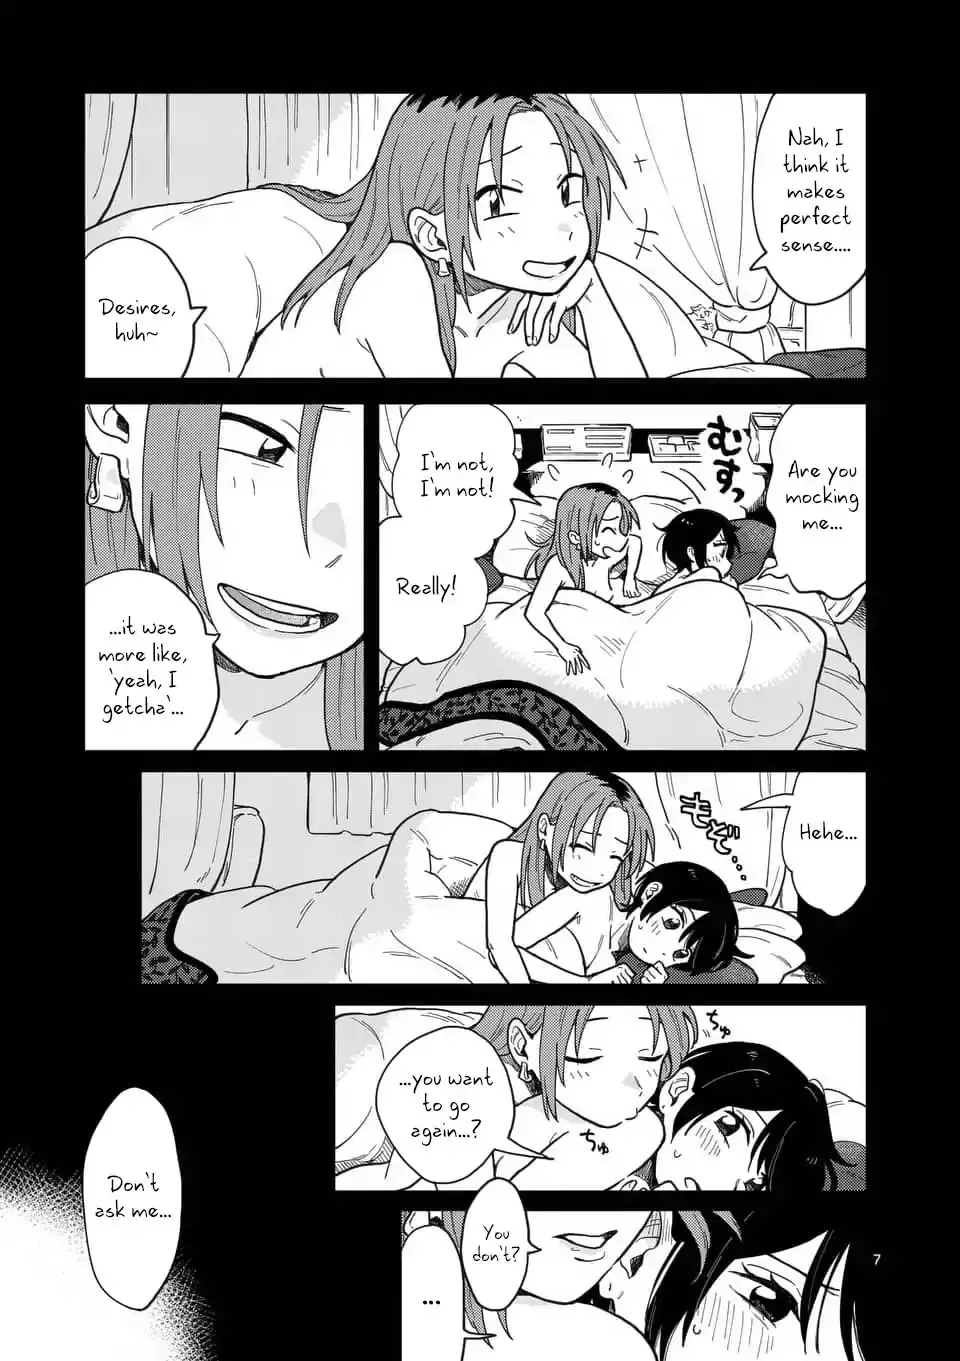 So, Do You Wanna Go Out, Or? - 10 page 7